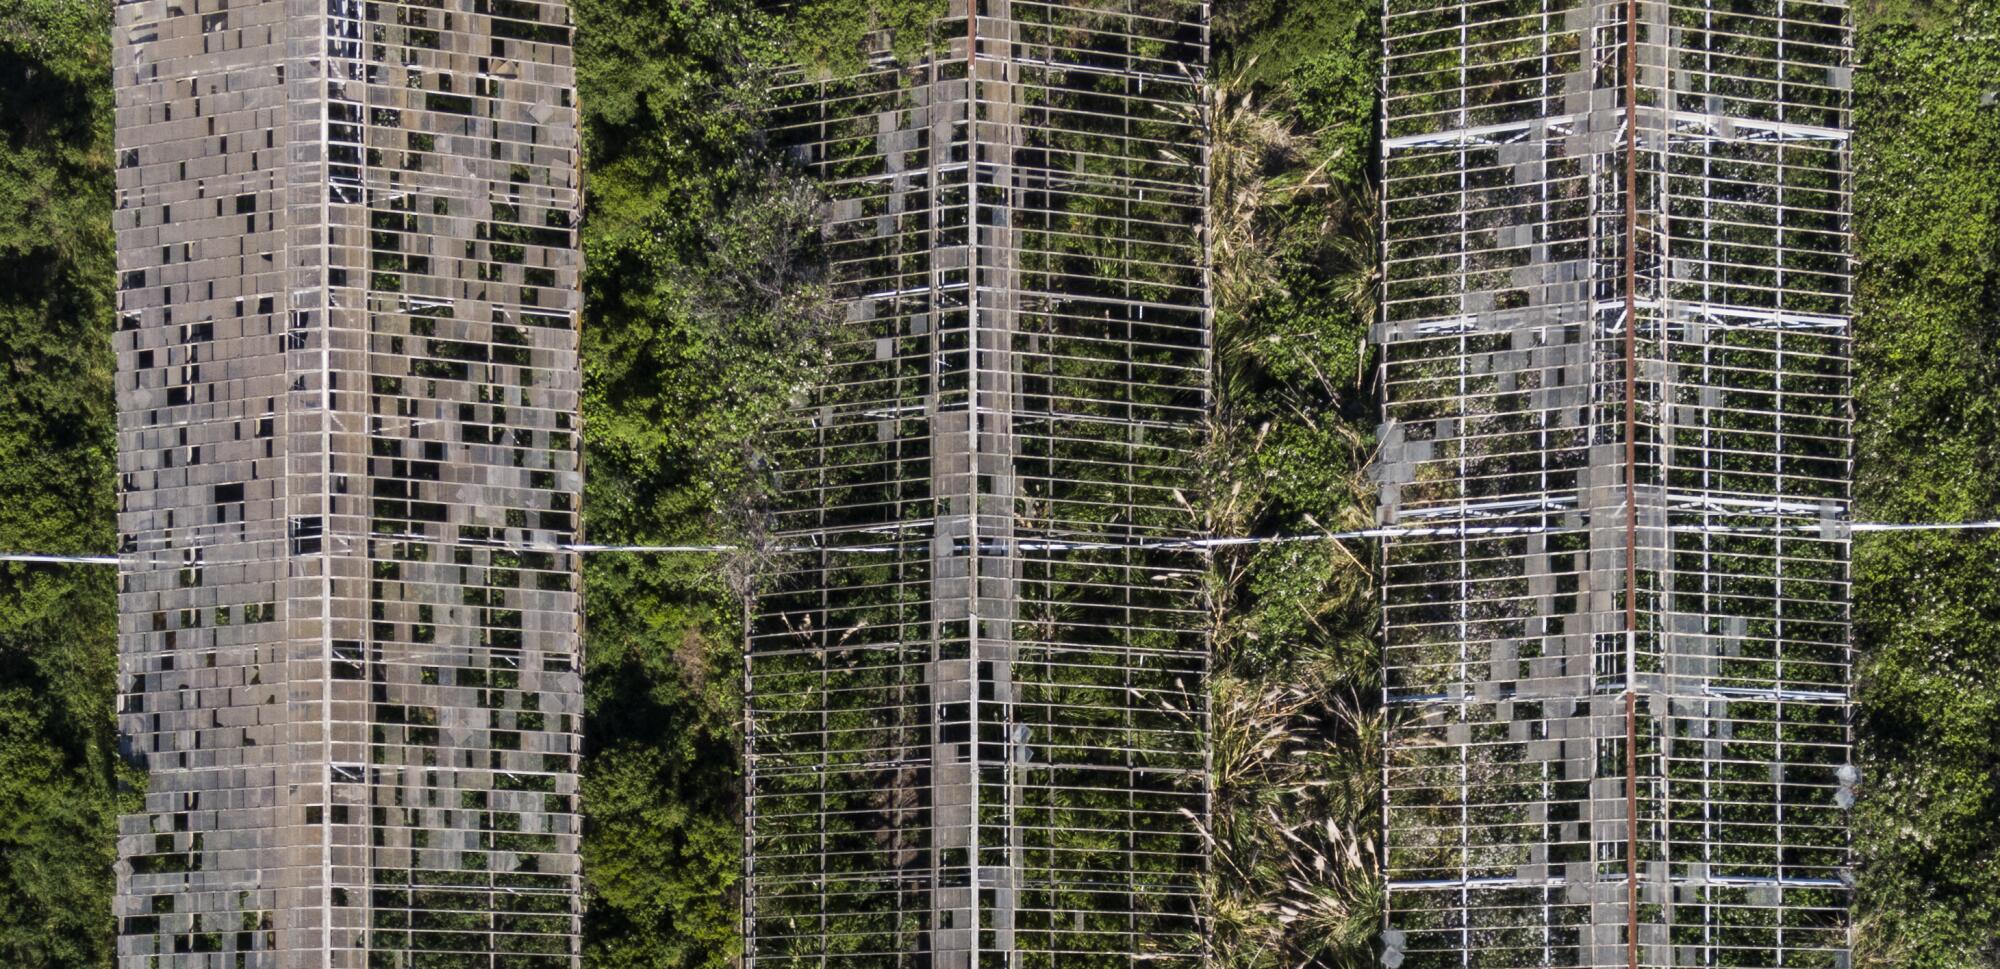 An aerial view of greenhouses with missing roof panels